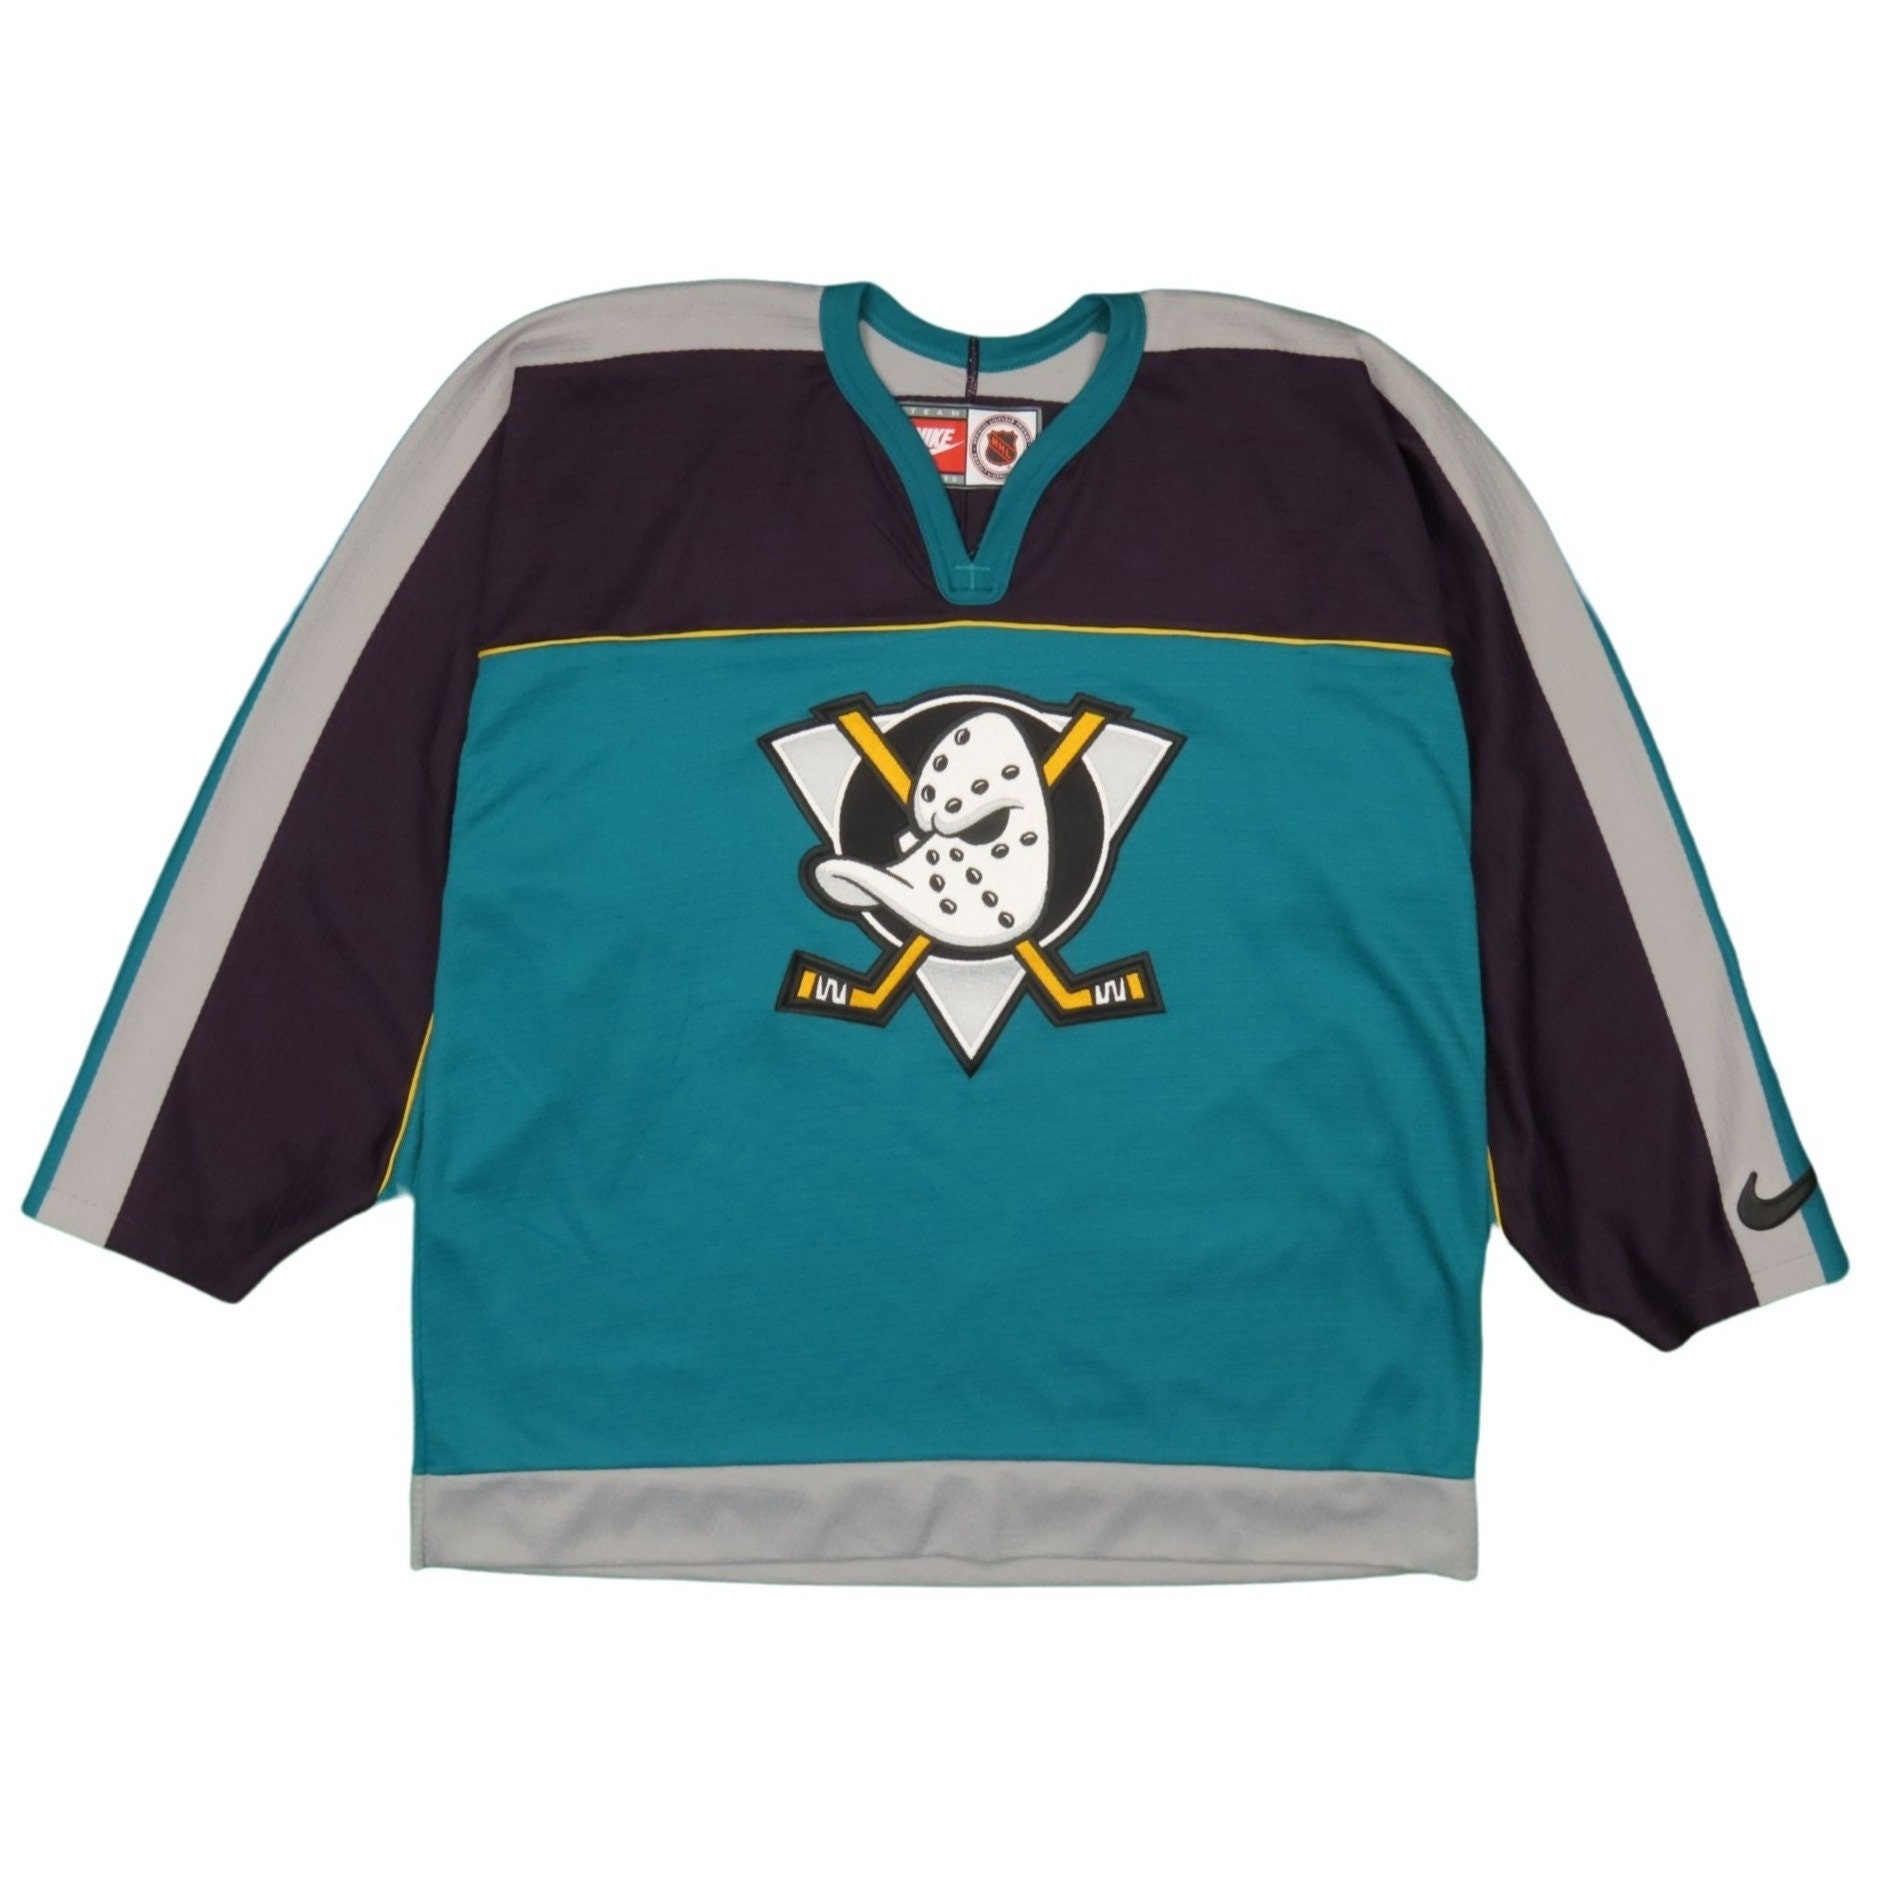 Buy Vintage Authentic 90s NHL Mighty Ducks by Disney Heavyweight Online in  India 